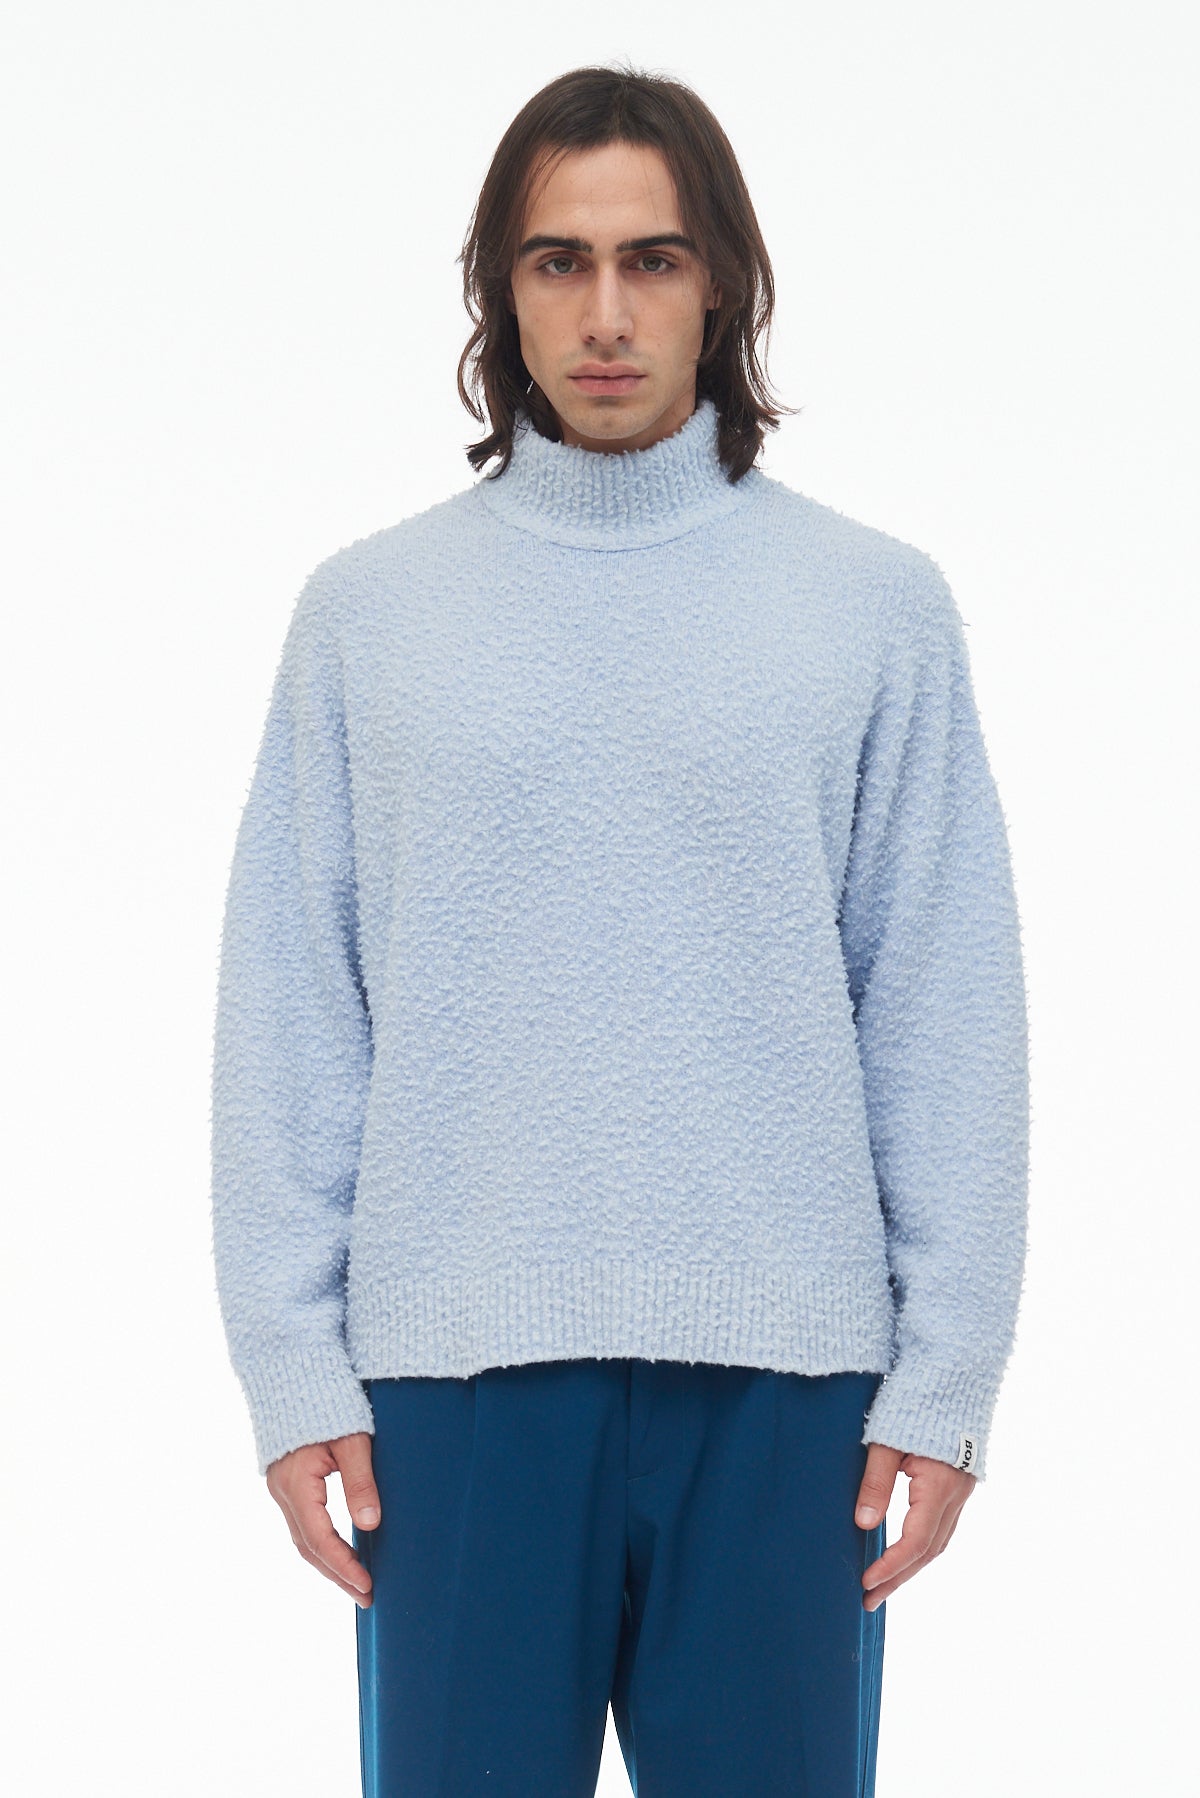 ICE CASENTINO SWEATER-UP TO 70% OFF